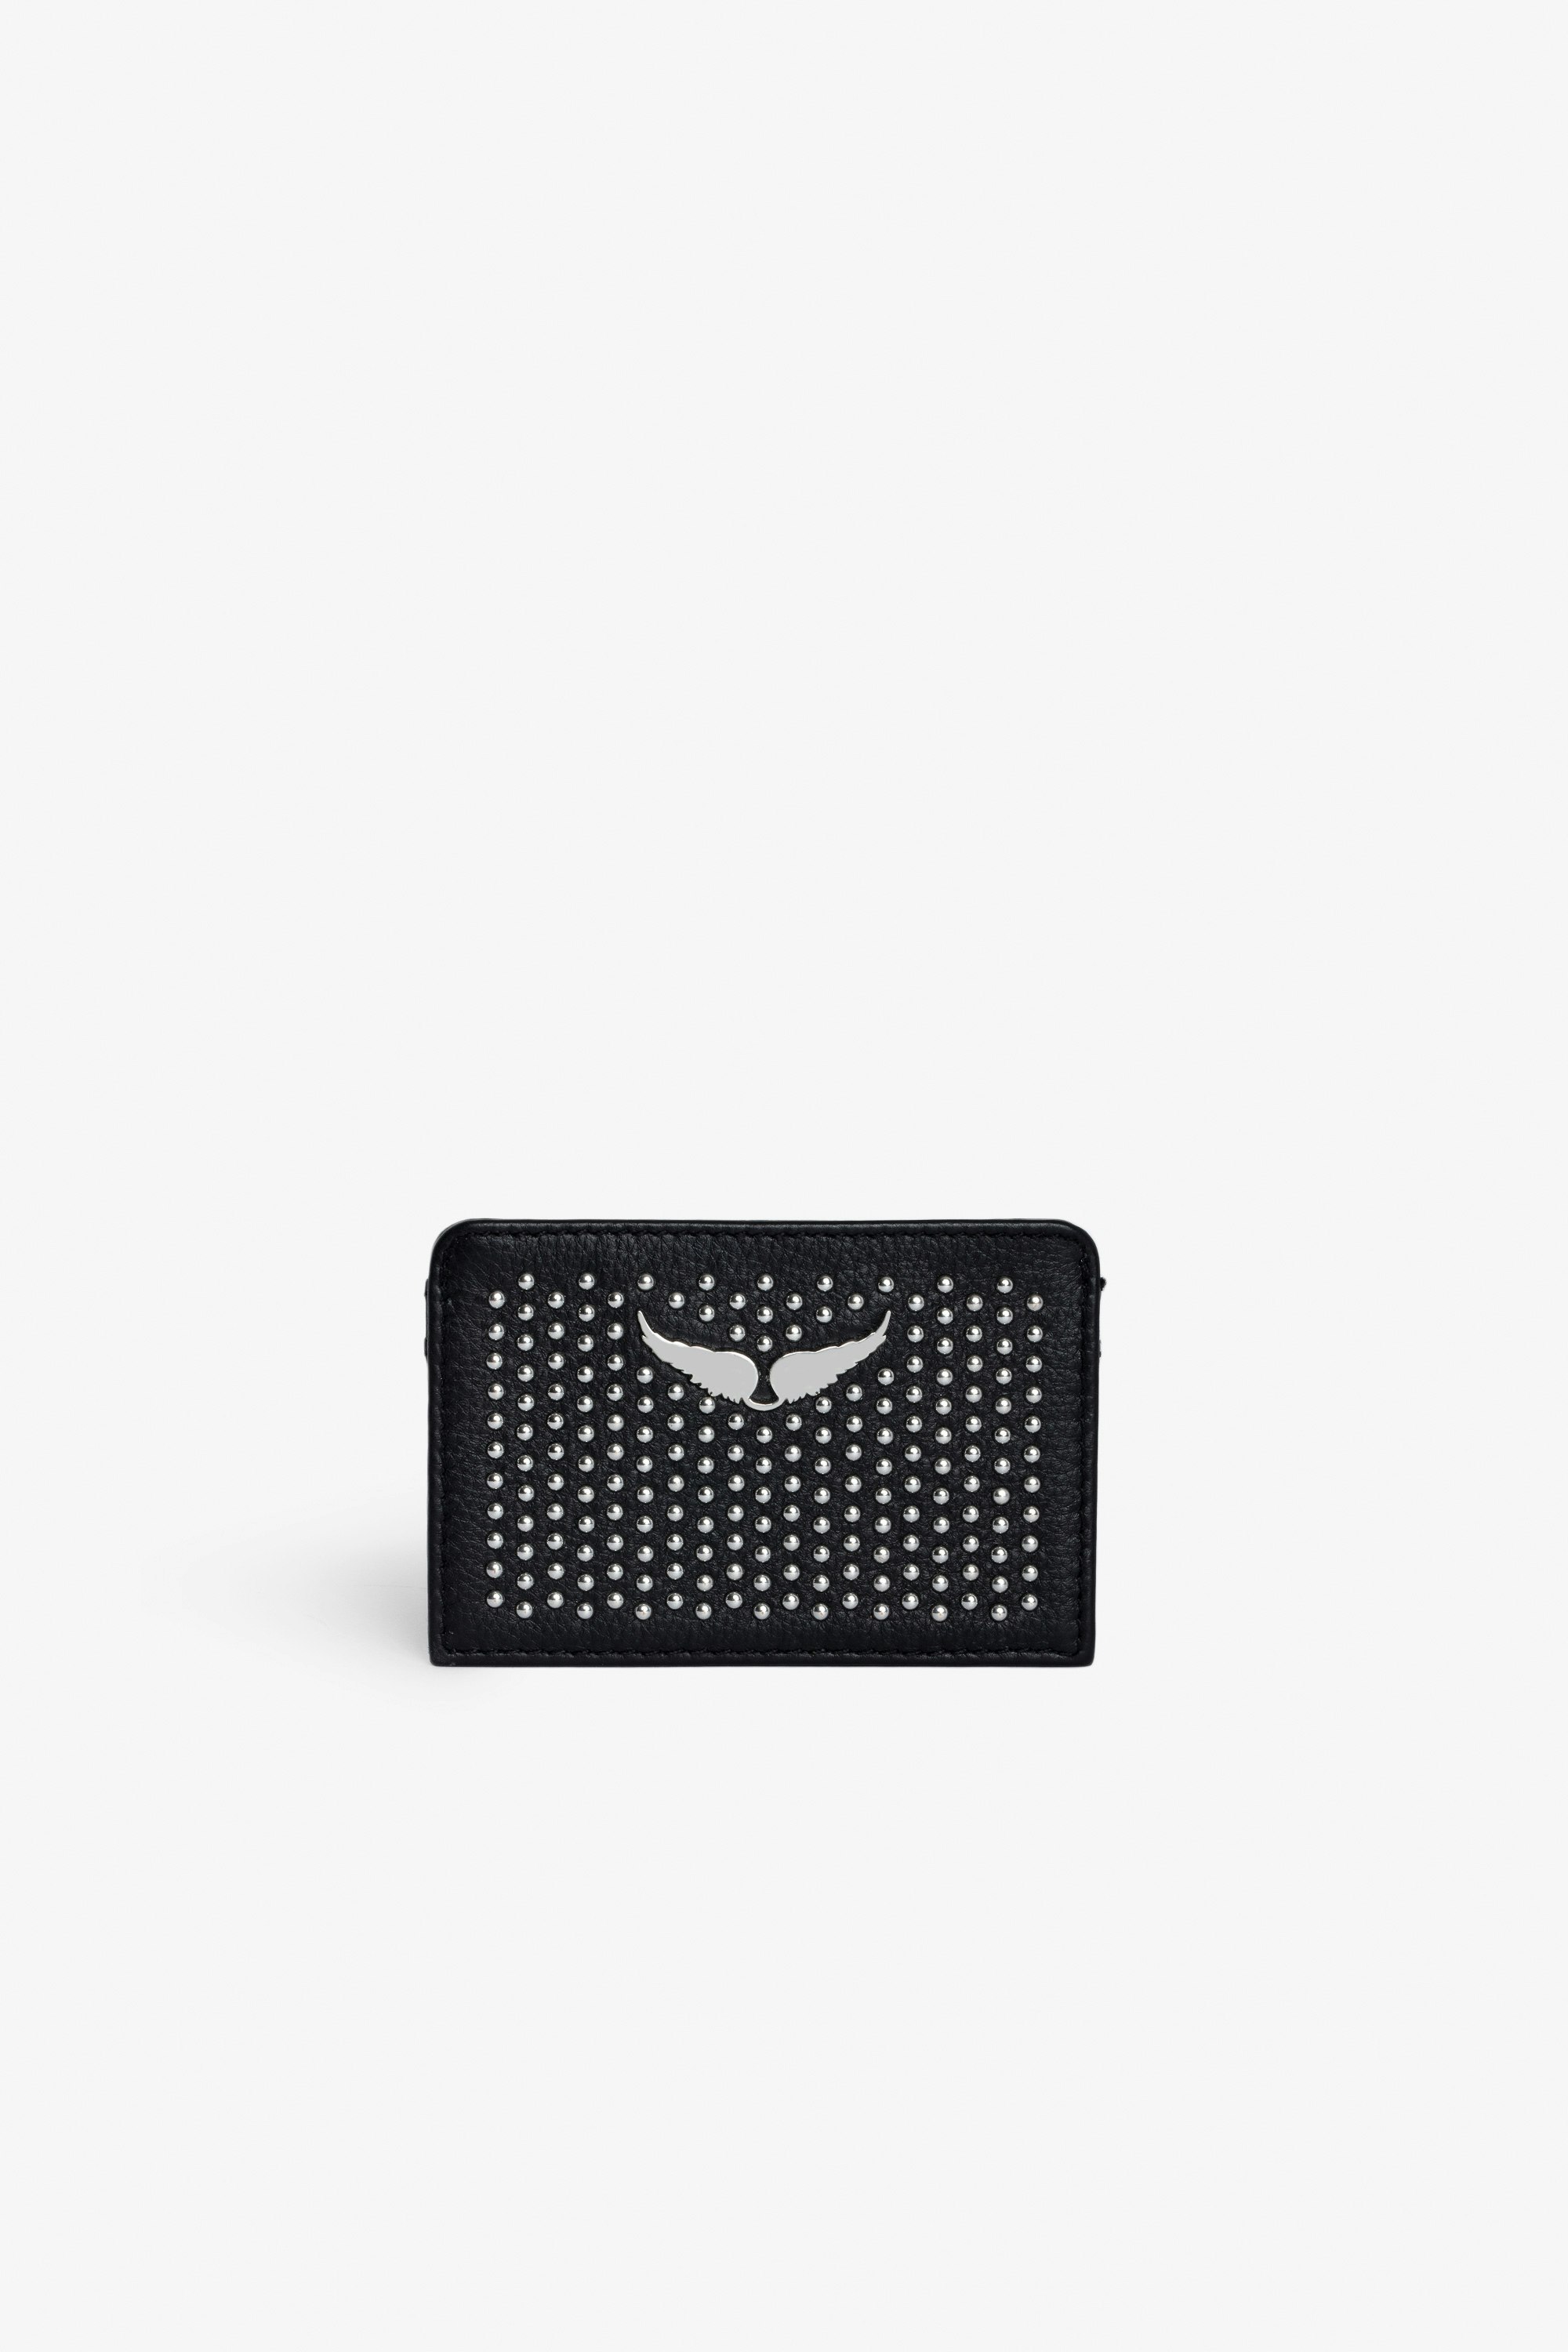 ZV Pass Dotted Swiss Card Holder - Women’s black grained leather card holder with studs and wings charm.